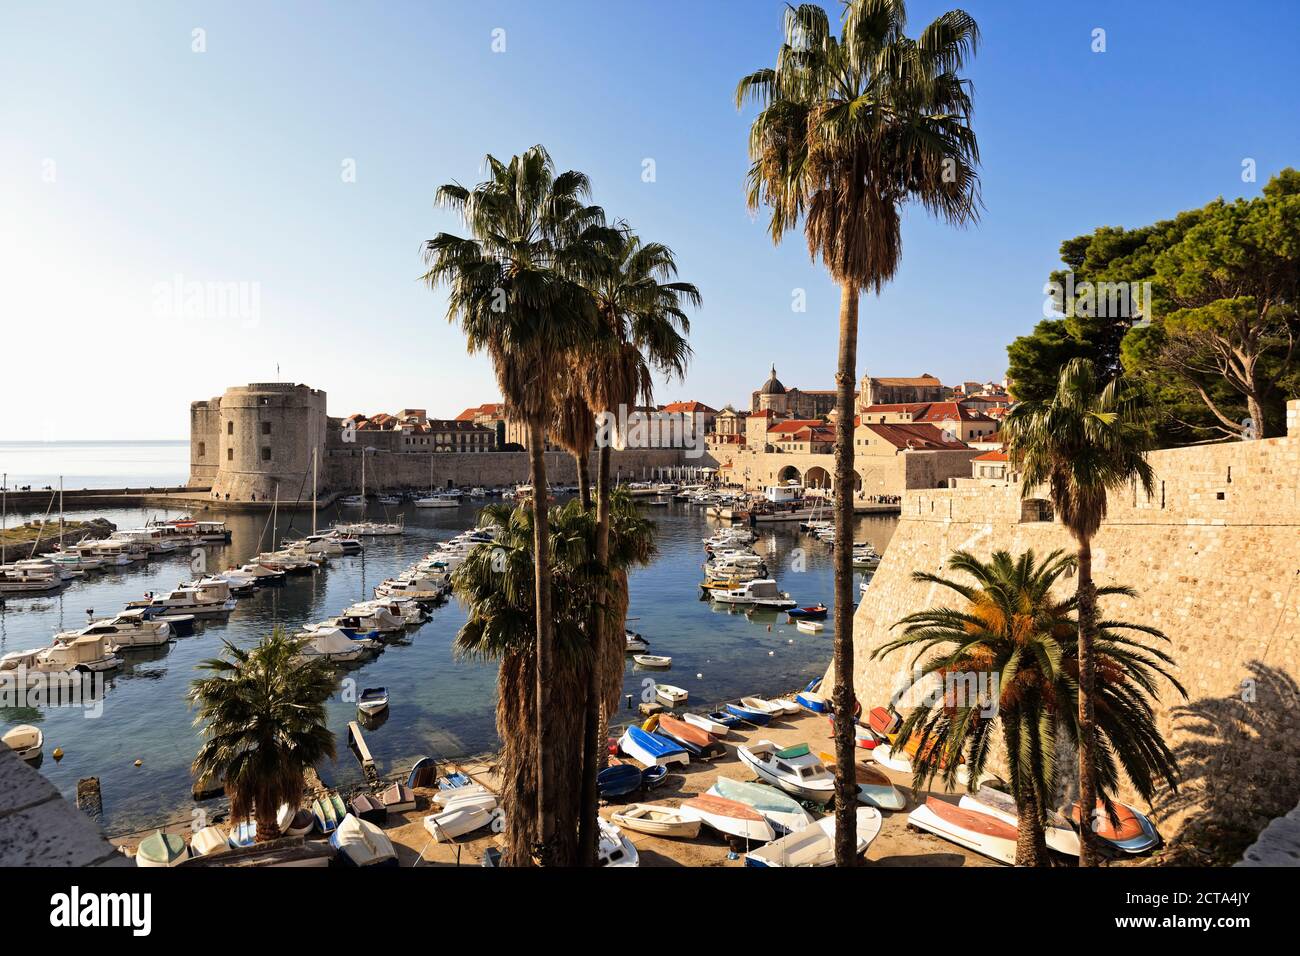 Croatia, Dubrovnik, View of old town and harbour Stock Photo